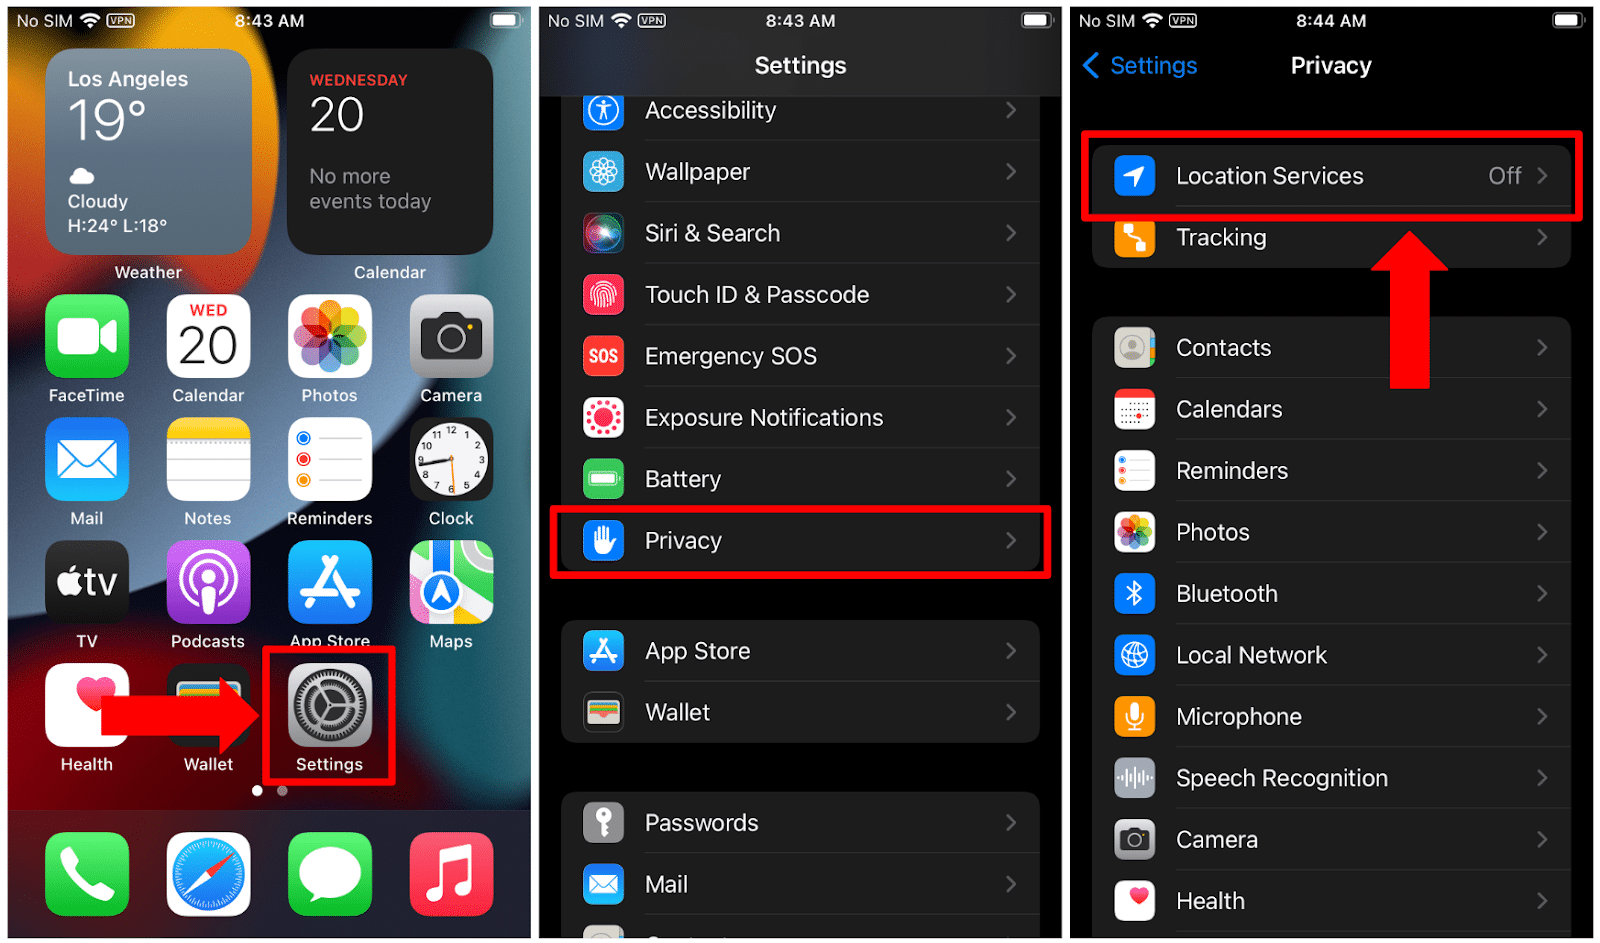 Toggling Location Services on the iPhone